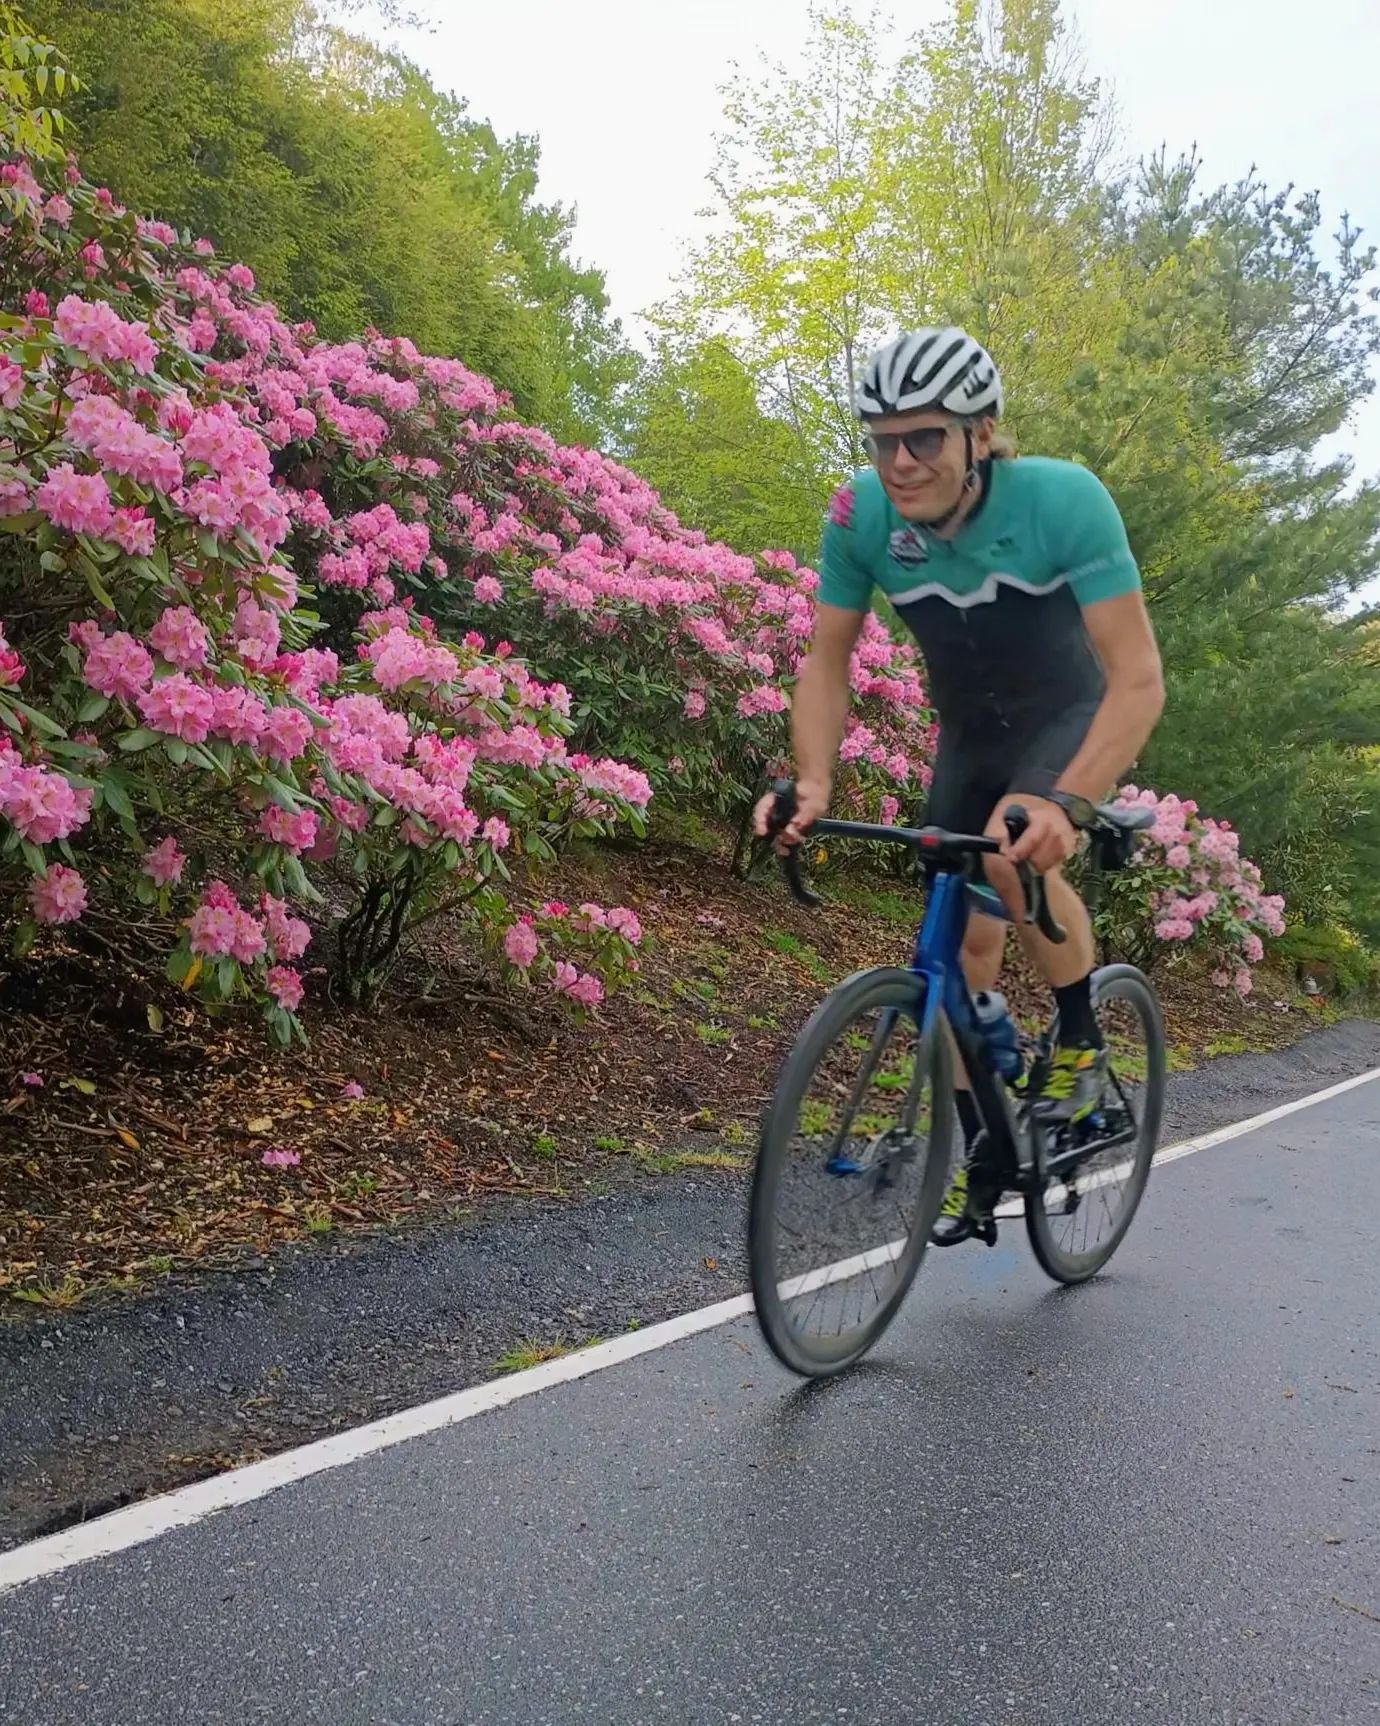 3T Experience Week is here and so are our name sakes: the first Rhododendron blooms of the season are out!! Demo fleet is ready for test riding. Come on in!
&bull;
&bull;
&bull;
#3TBikes #3T #3TExperienceWeek #roadbike #roadcycling #gravelbike #groad